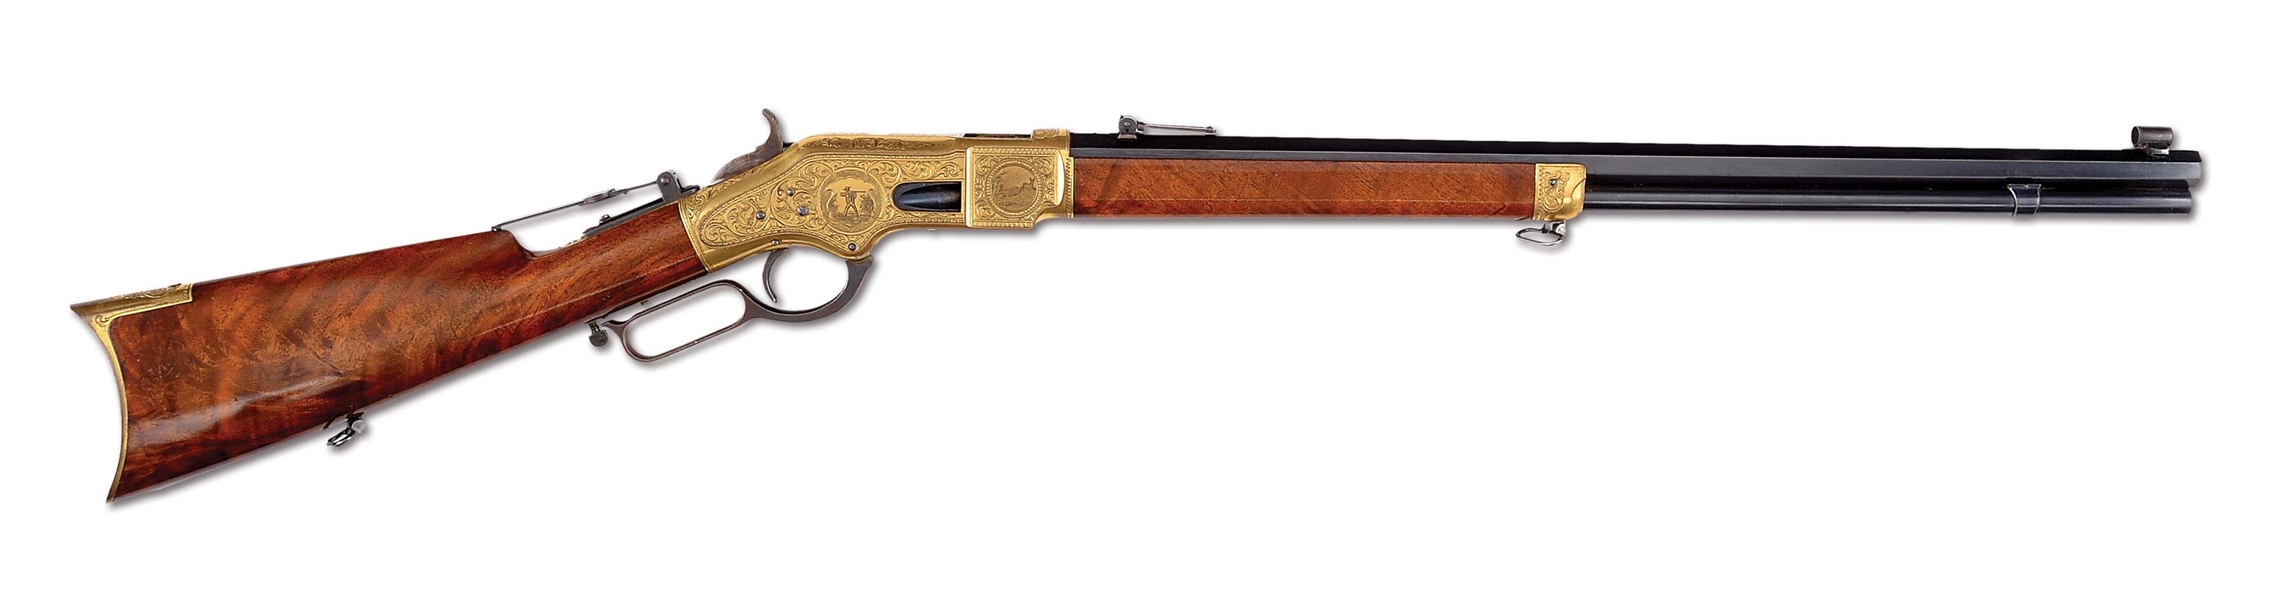 (A) FANTASTIC MODEL 1866 ENGRAVED RIFLE WITH GOLD PLATED RECEIVER (1870).